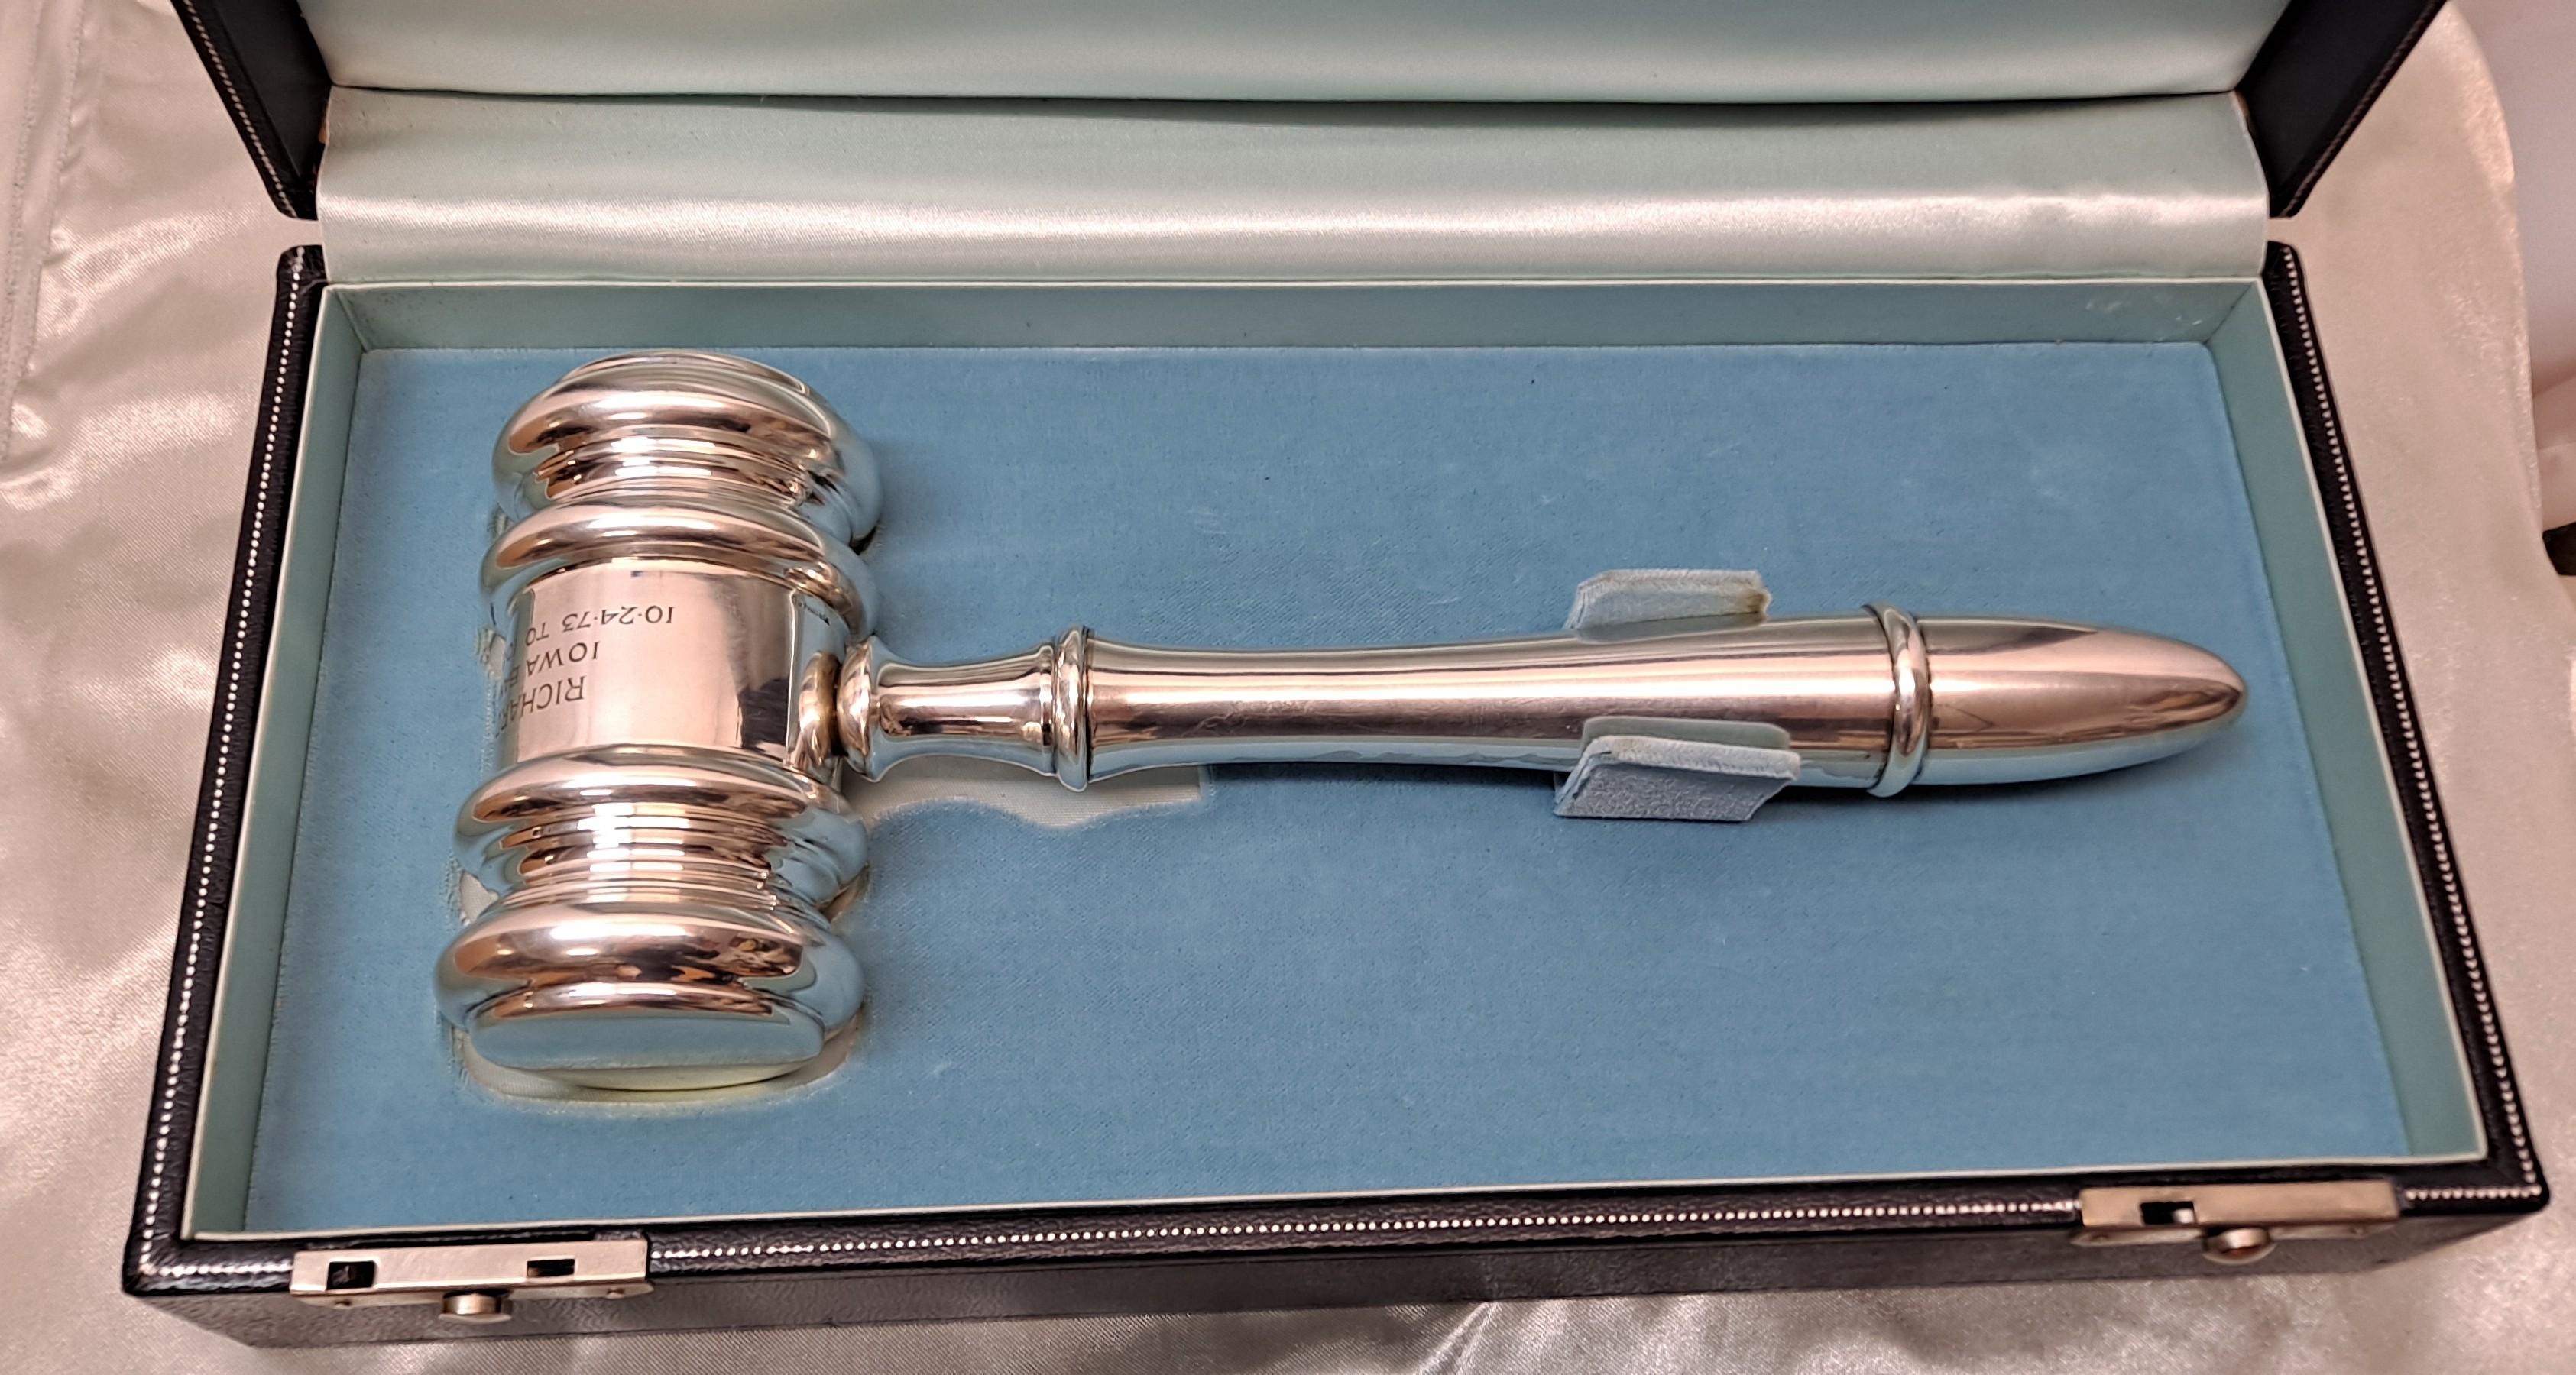 Tiffany and Company Sterling Gavel With Original Box

Engraved 